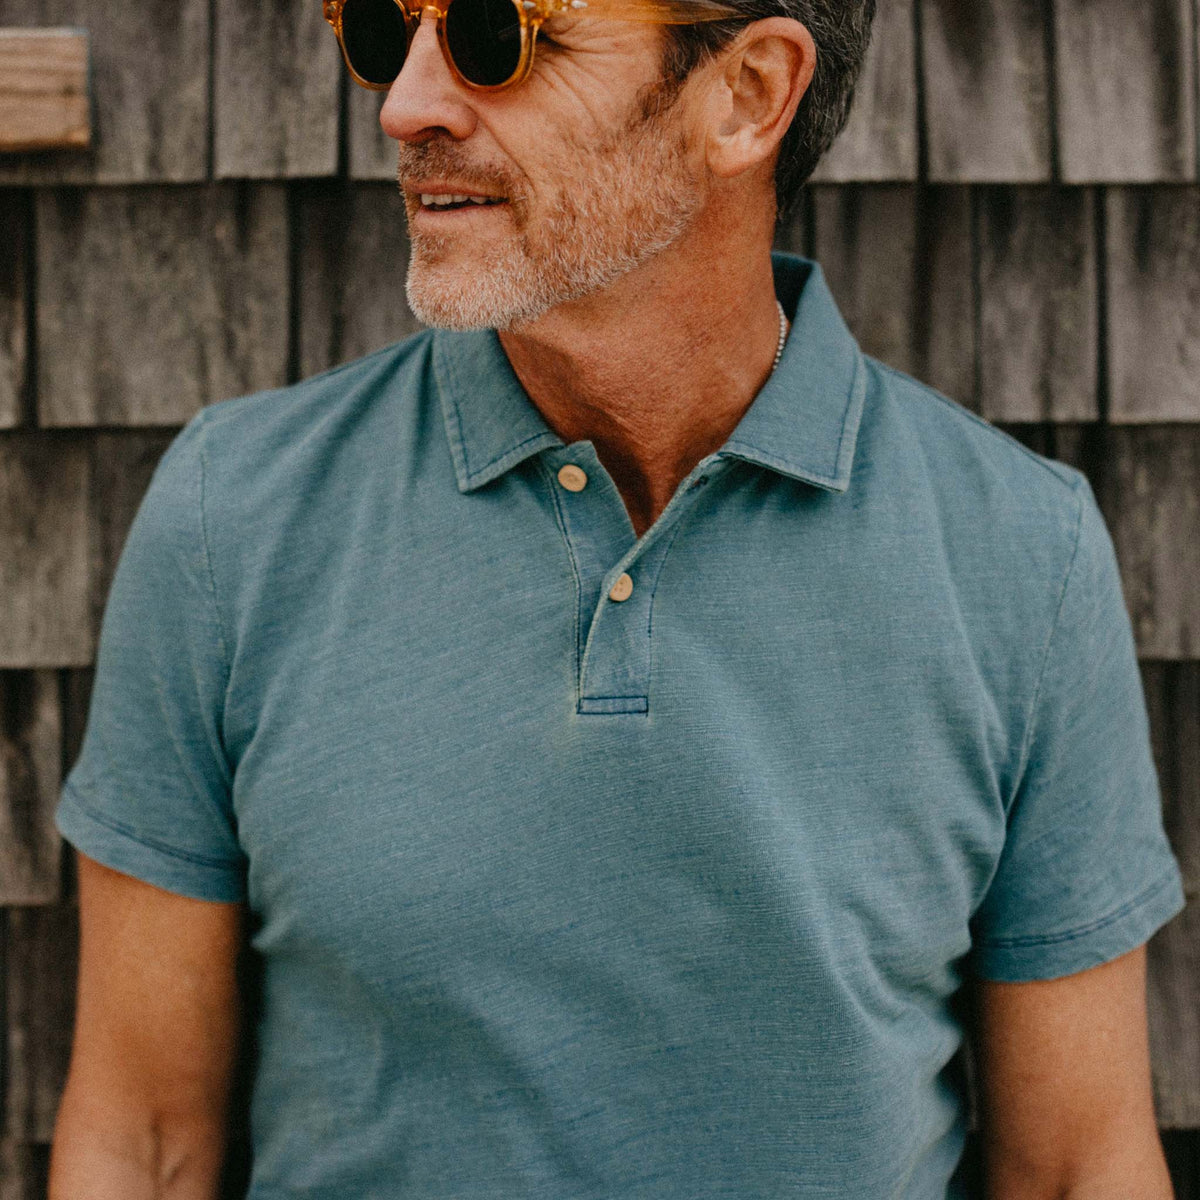 The Organic Cotton Polo in Washed Indigo